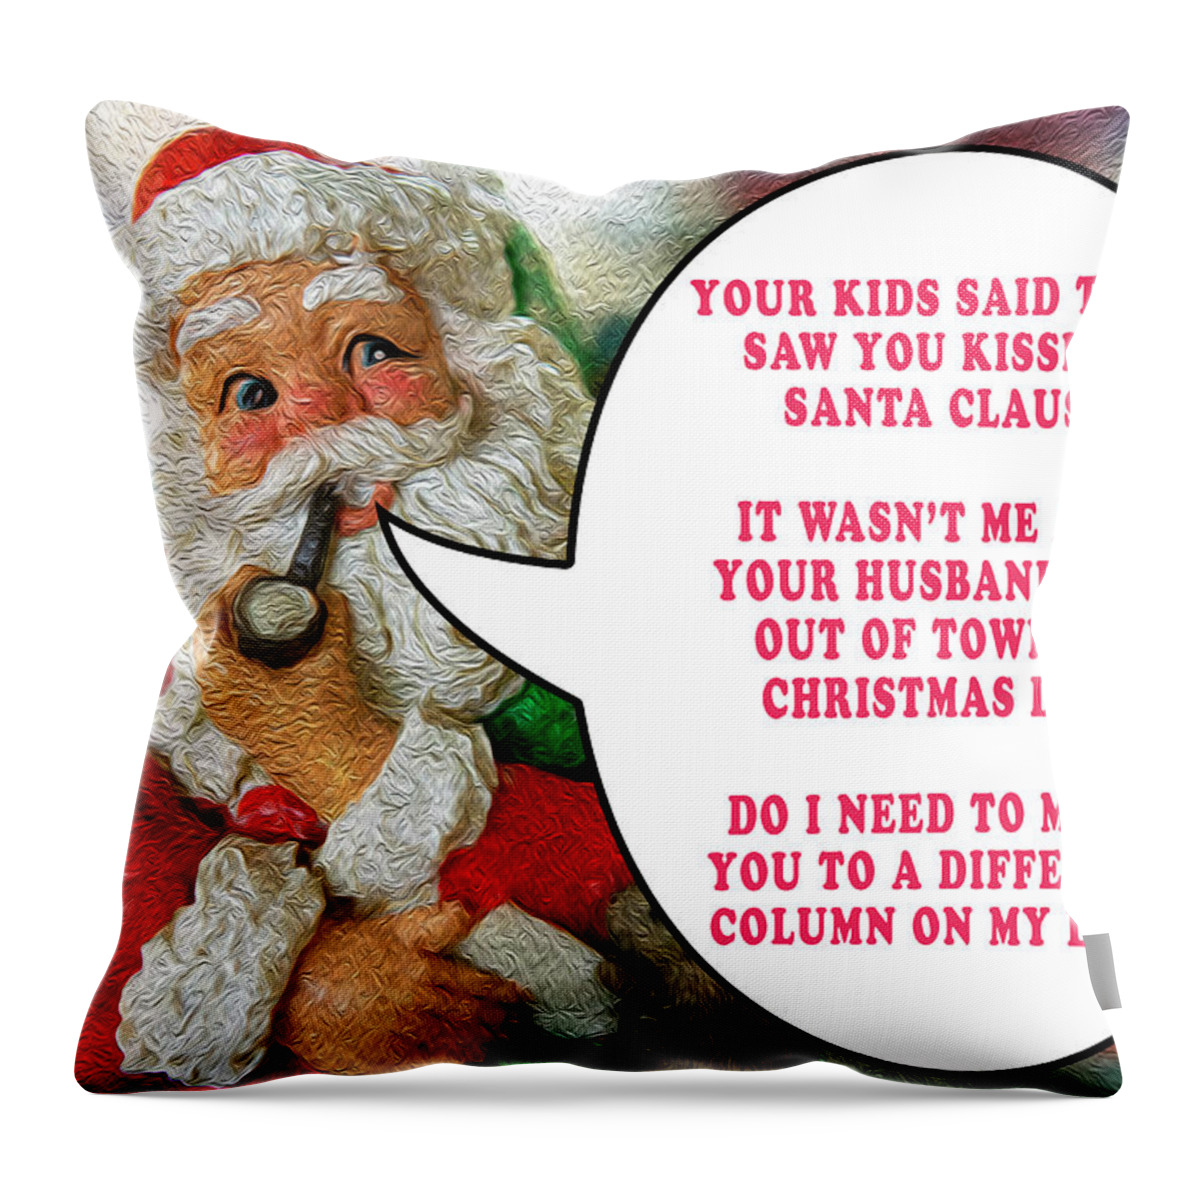 I Saw Mommy Kissing Santa Claus Unfaithful Promiscuous Naughty List Funny Christmas Card Humorous Joke Throw Pillow featuring the photograph Who Was Mommy Kissing? by David Morehead